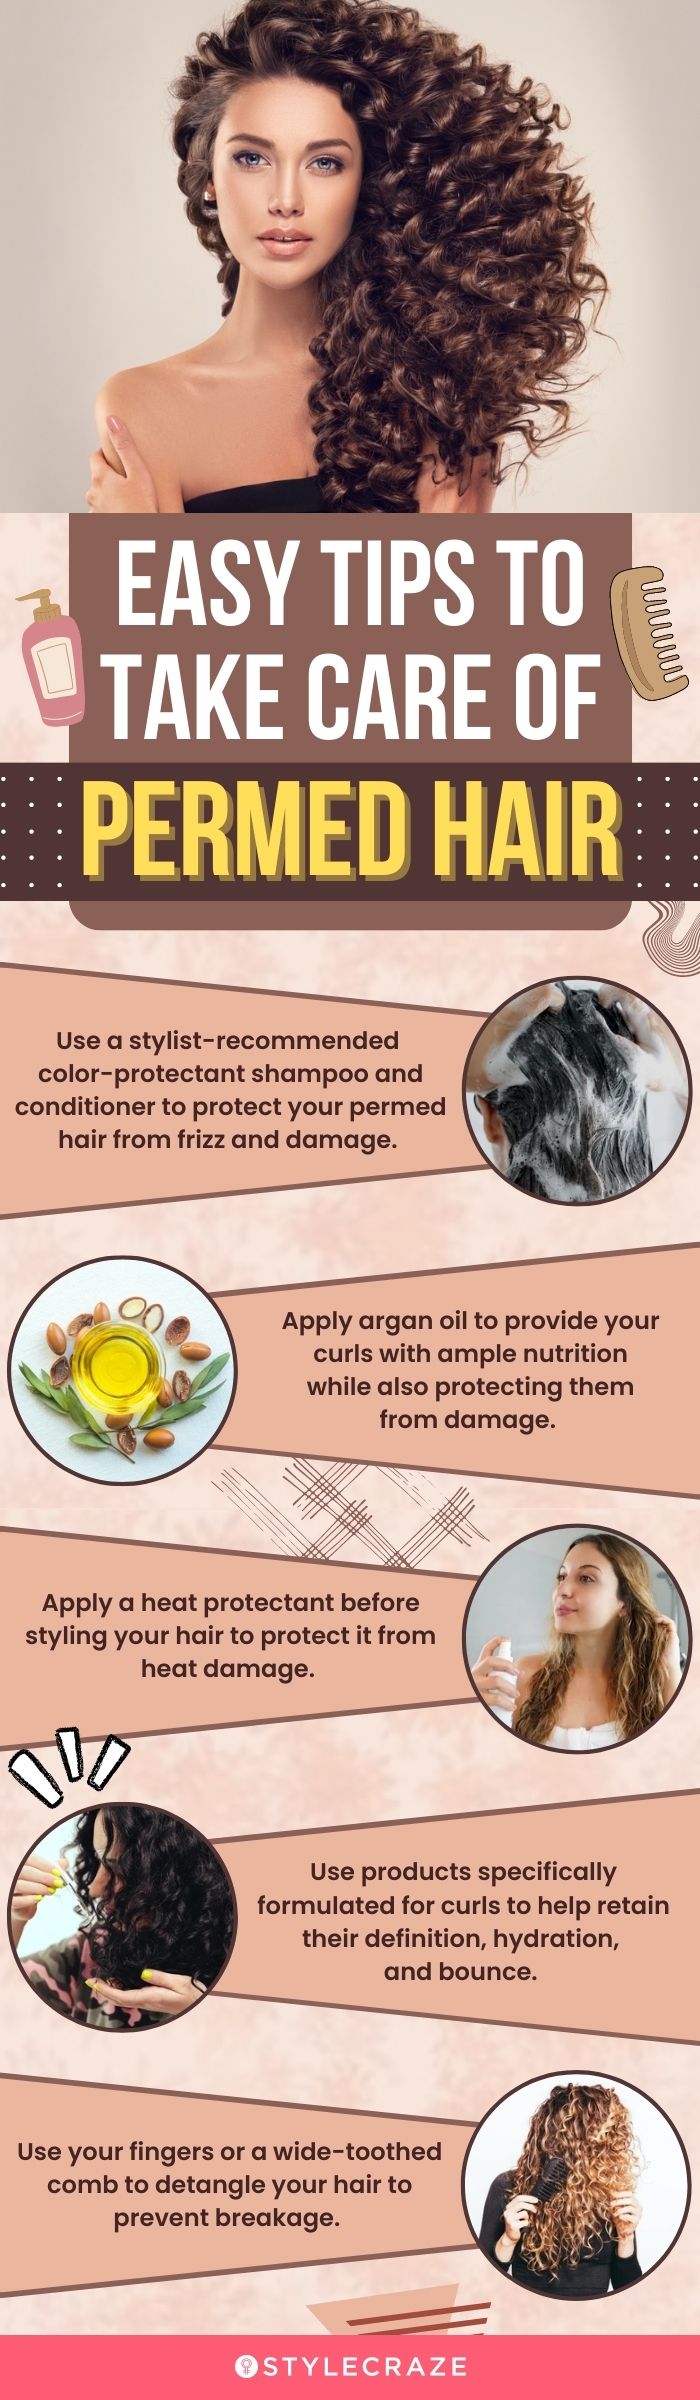 easy tips to take care of permed hair (infographic)